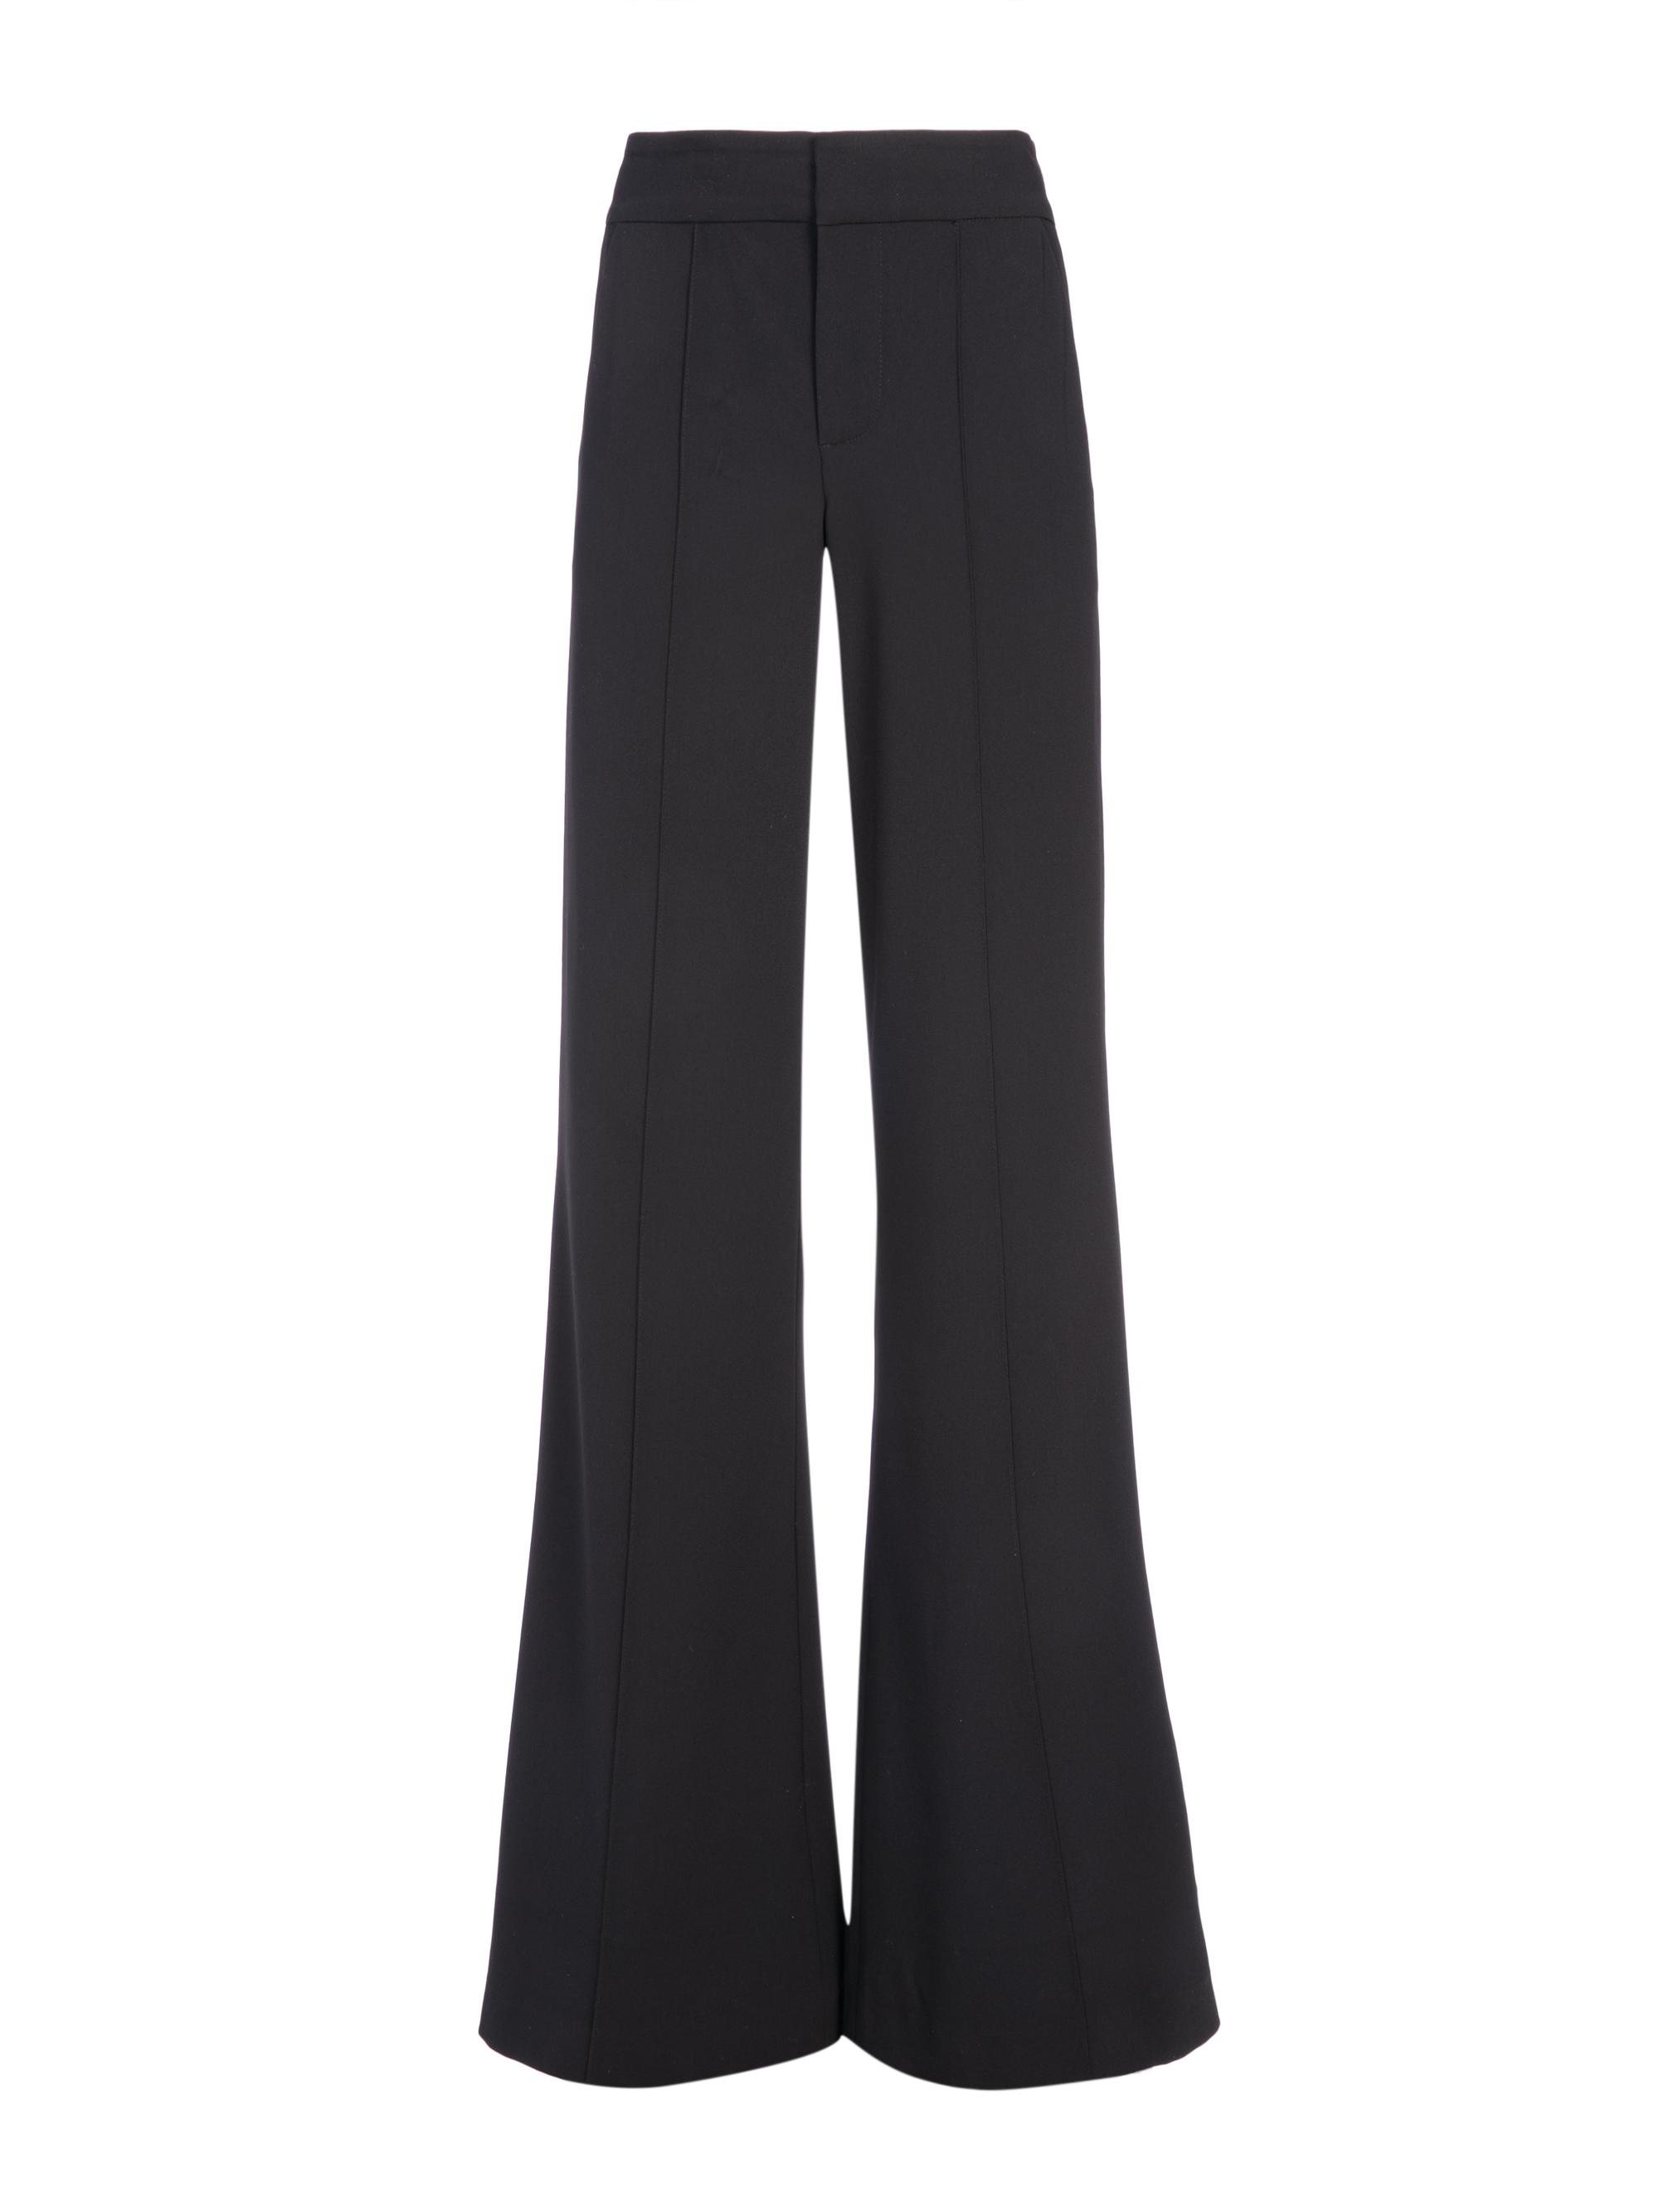 Alice + Olivia Synthetic Dylan High Waisted Wide Leg Pant in Black - Lyst